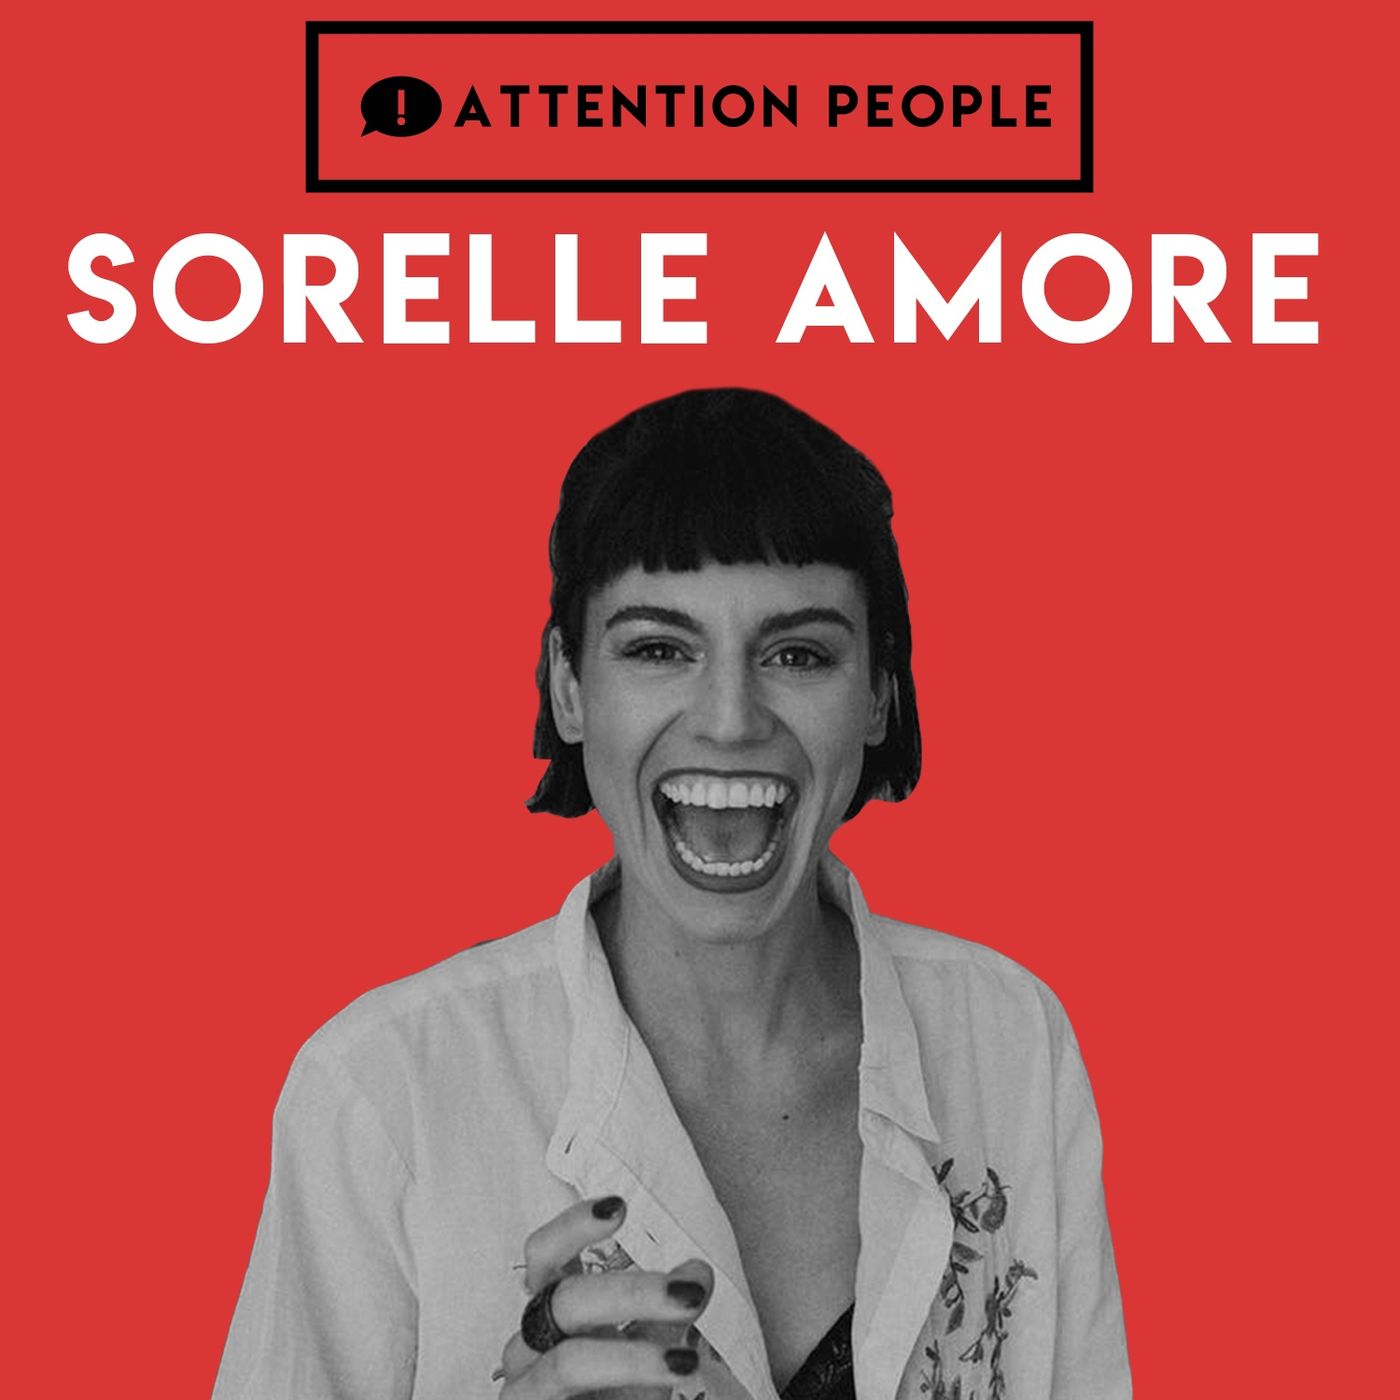 Sorelle Amore - Best Job In The World & Being A Travelling YouTuber